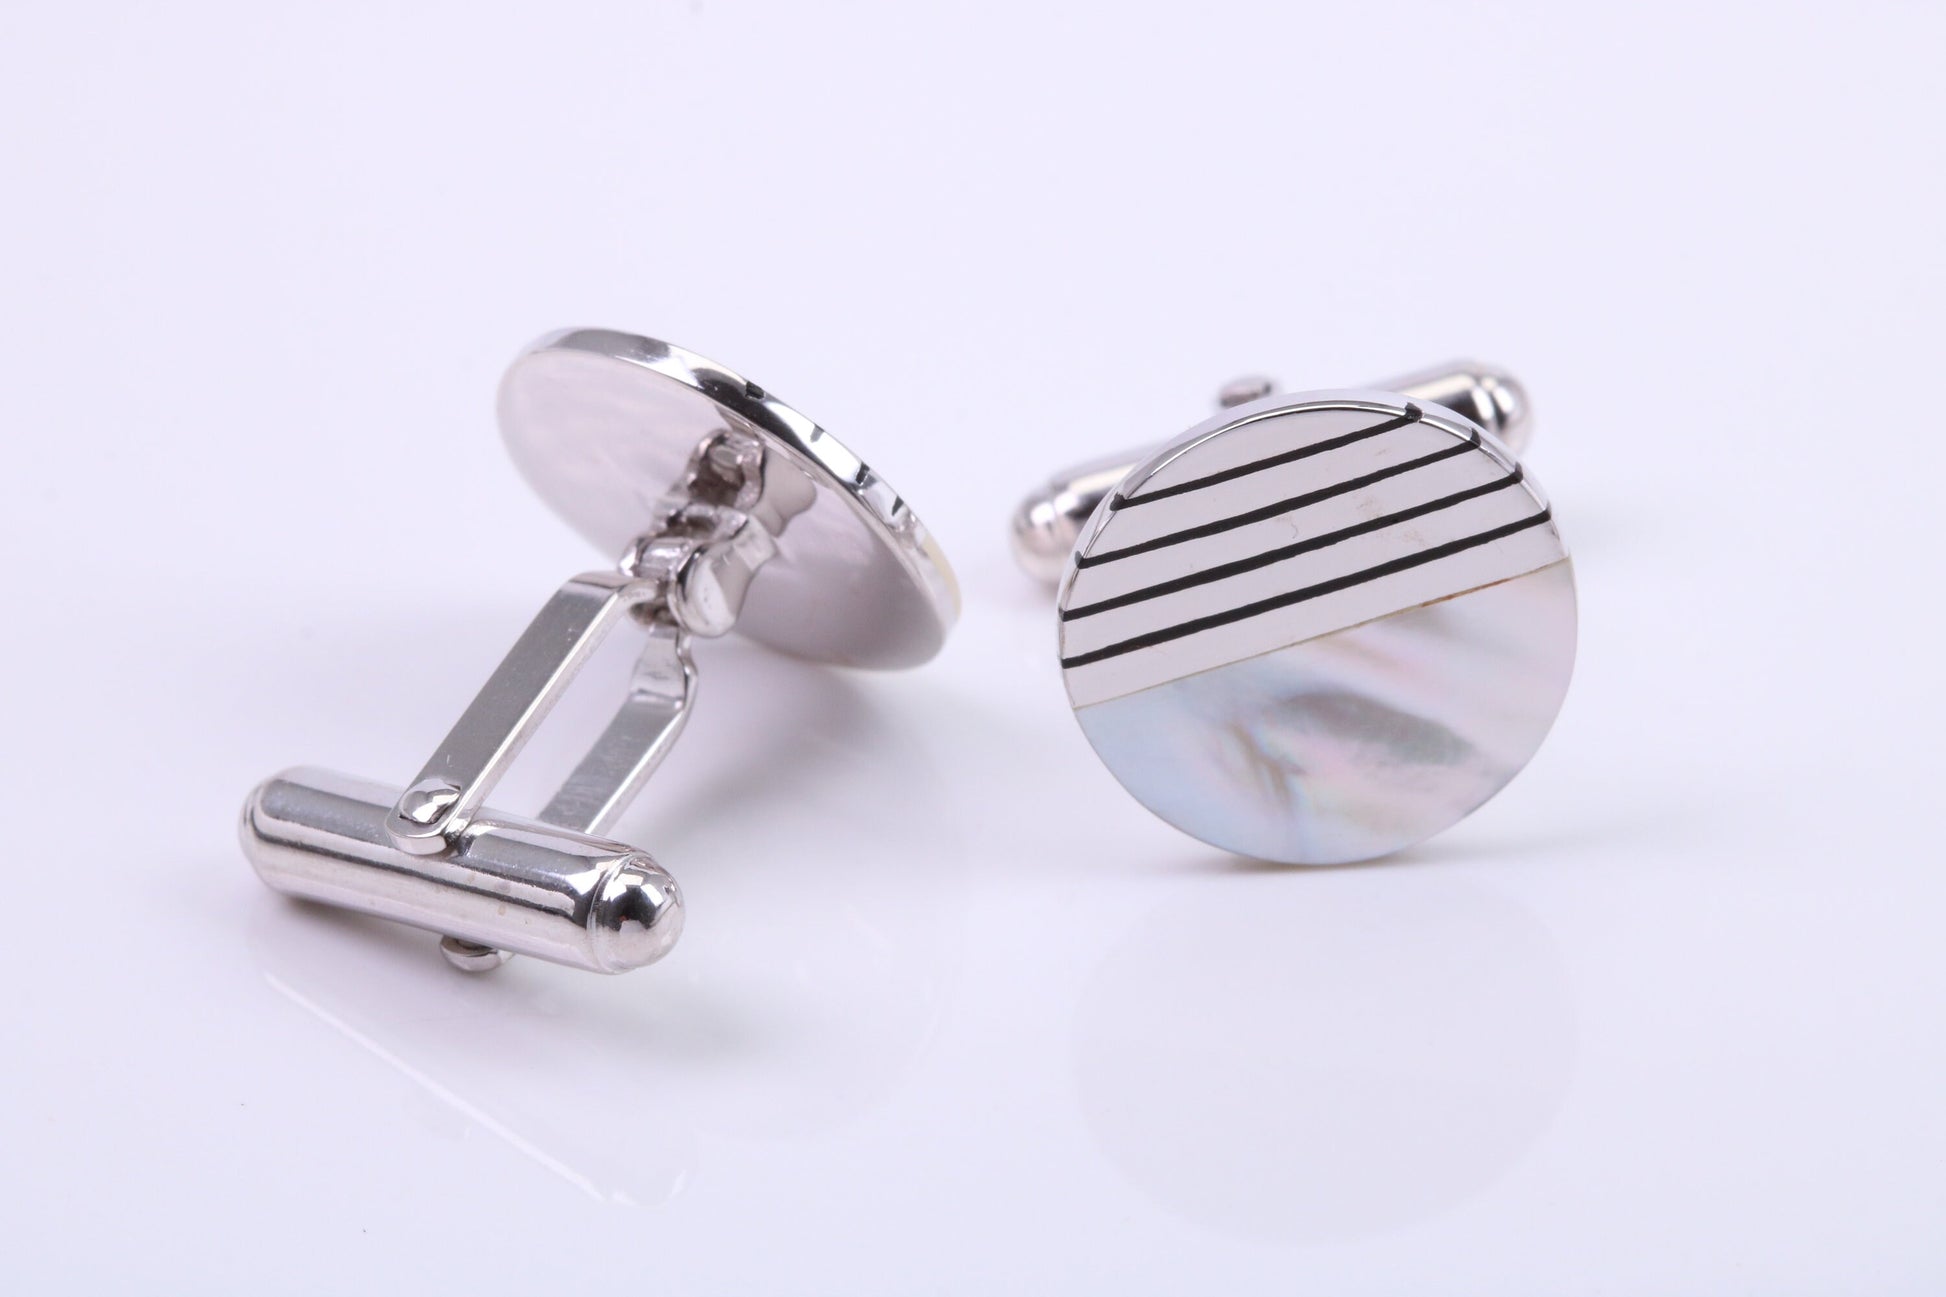 Black Onyx and Mothe of Pearl set Round Solid Silver Cufflinks